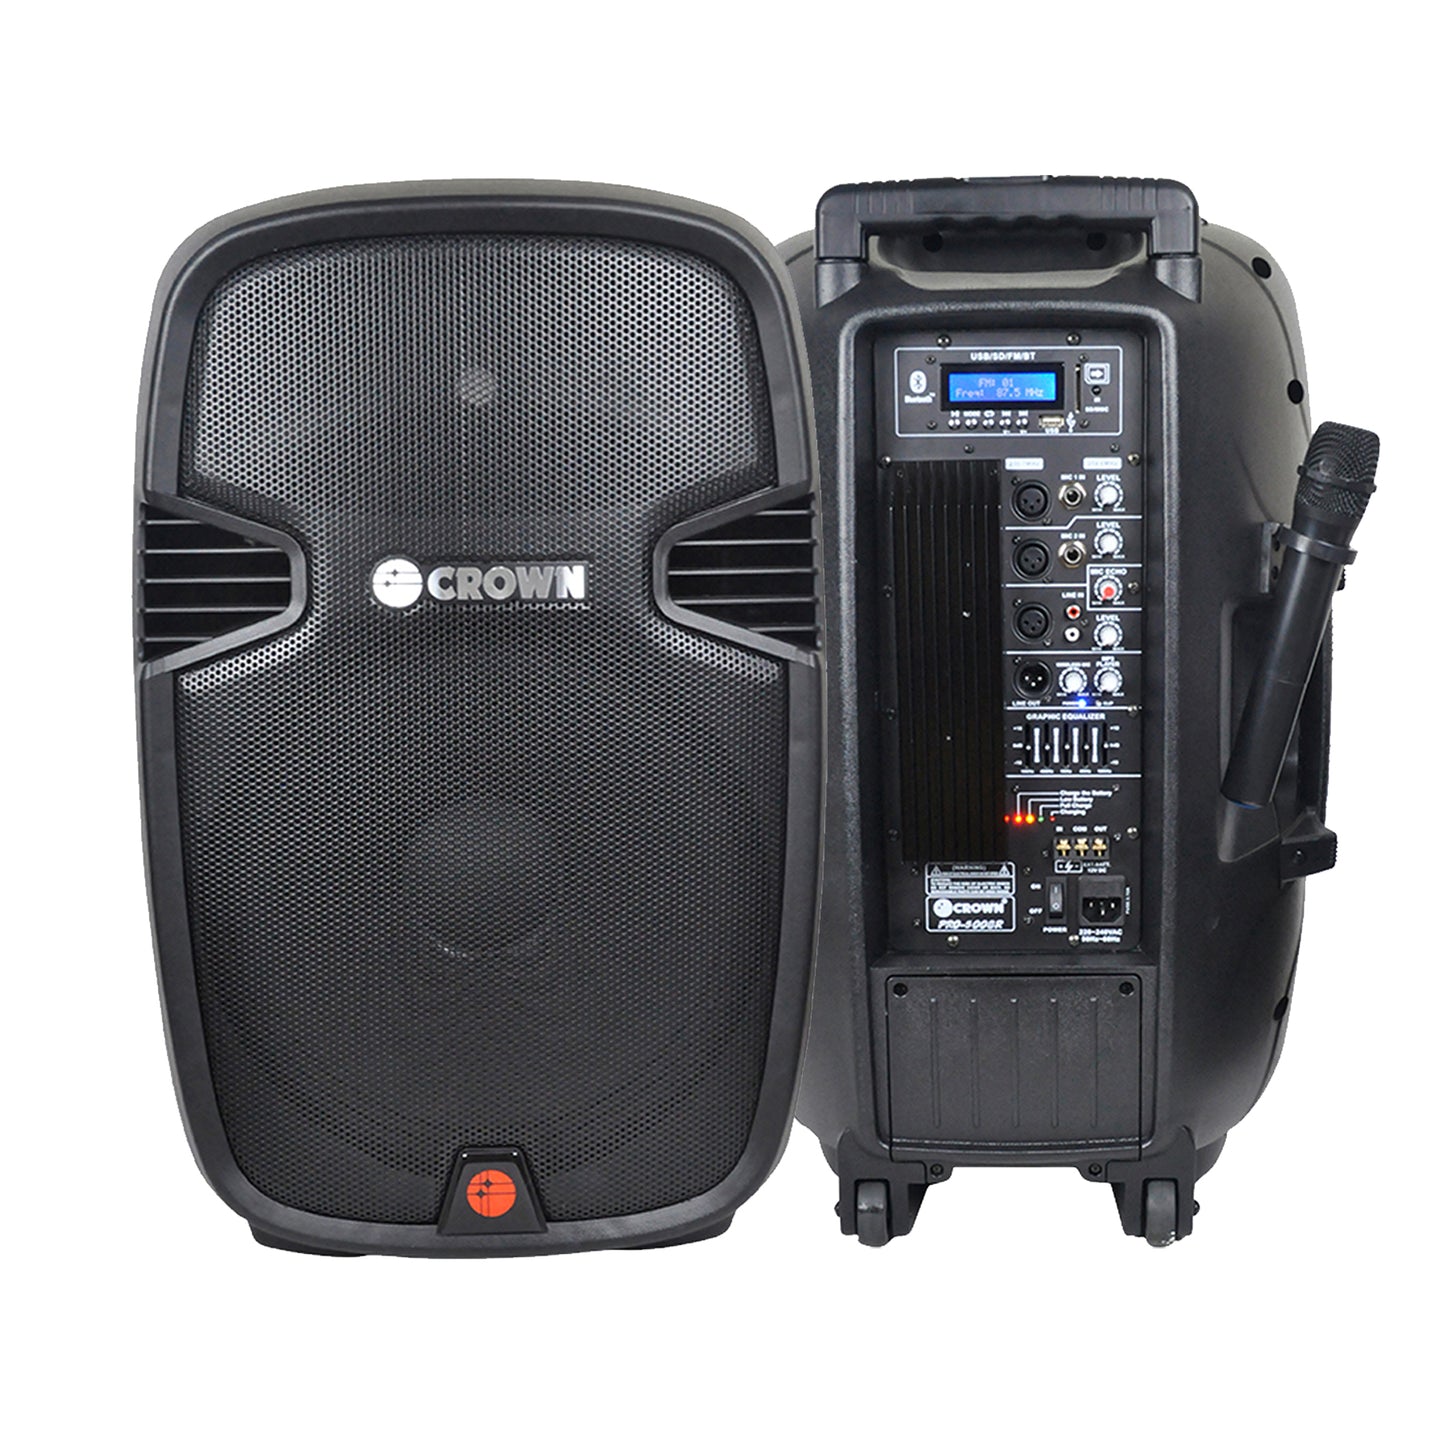 Crown PRO-5008R+ 480W 15" 2-Way Active Rechargeable Sound System Bluetooth Speaker with LCD Display, 5 Band Equalizer, 2 Wireless Mics,  Microphone, Guitar Input, USB & SD Port, Aux Line I/O